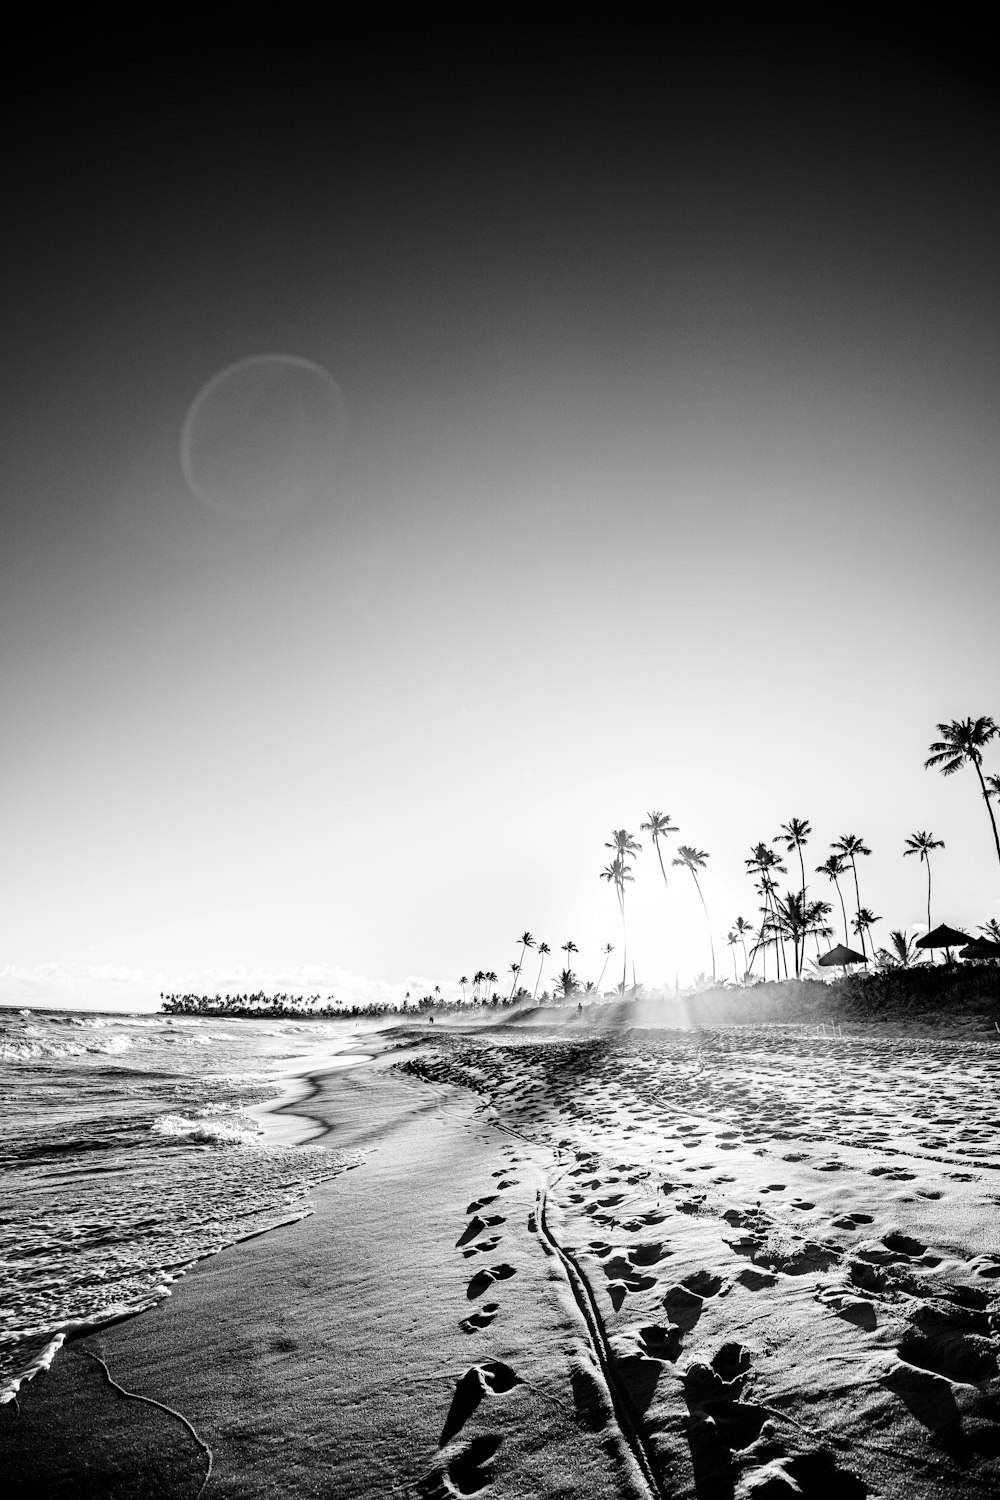 grayscale photo of palm trees on beach